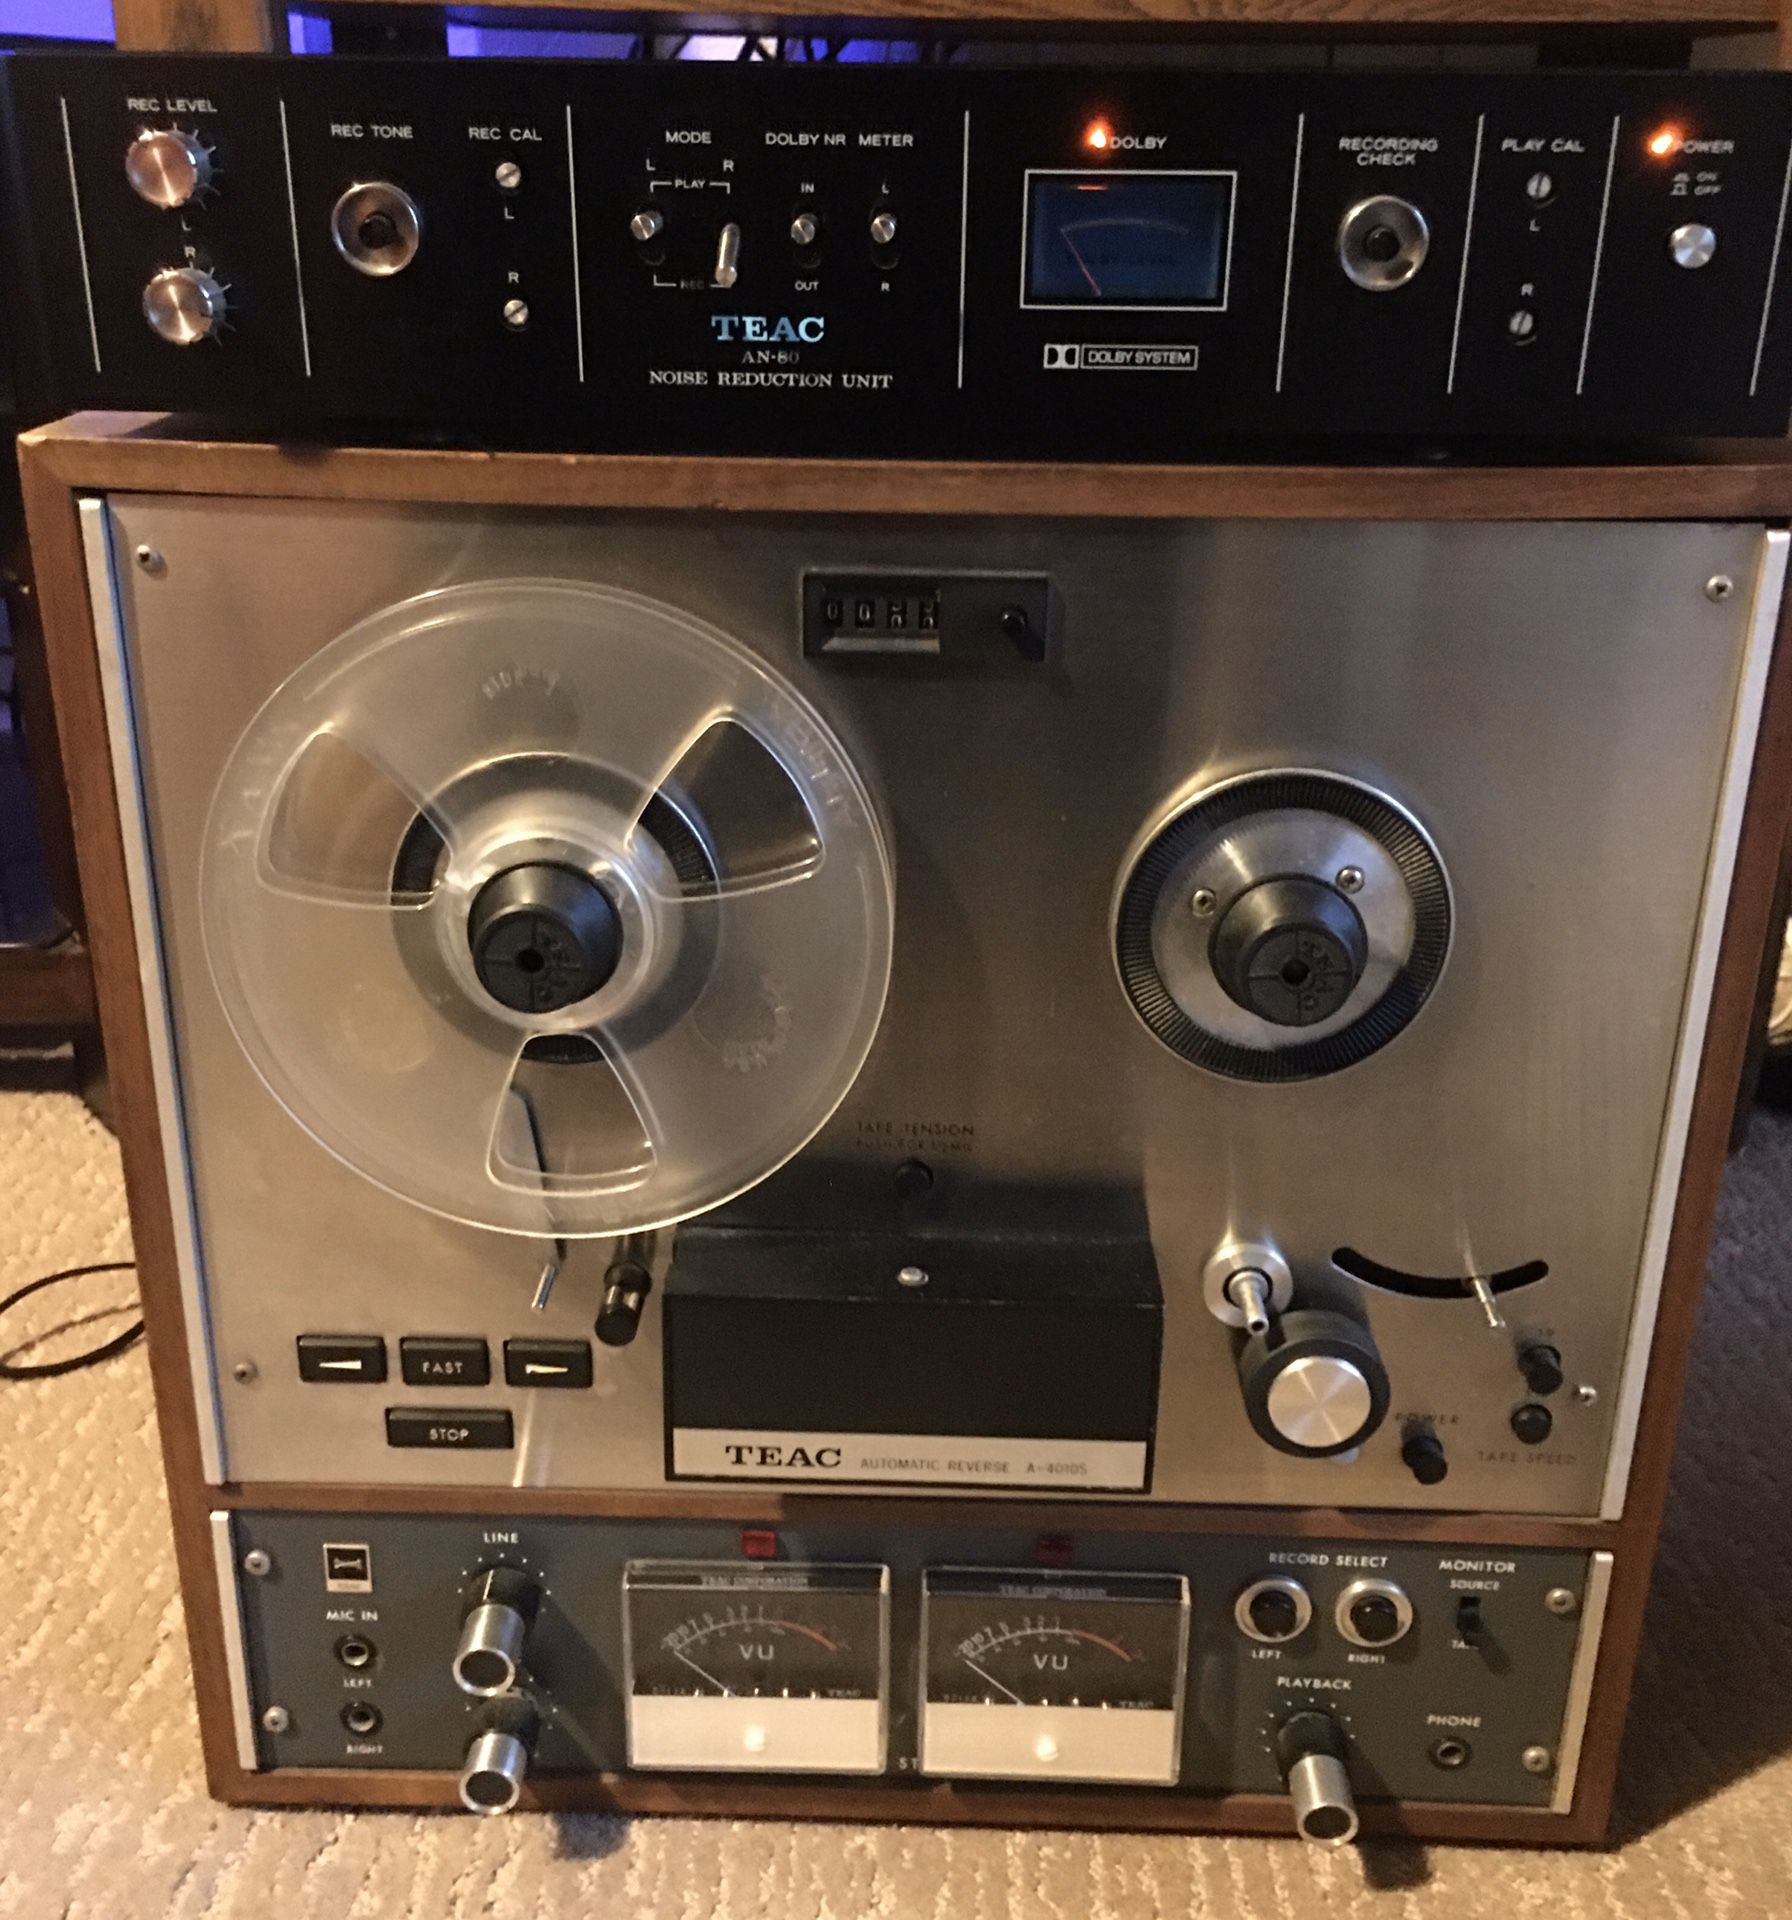 Teac A-4010s Reel To Reel and Teac AN-80 Noise Reduction Unit